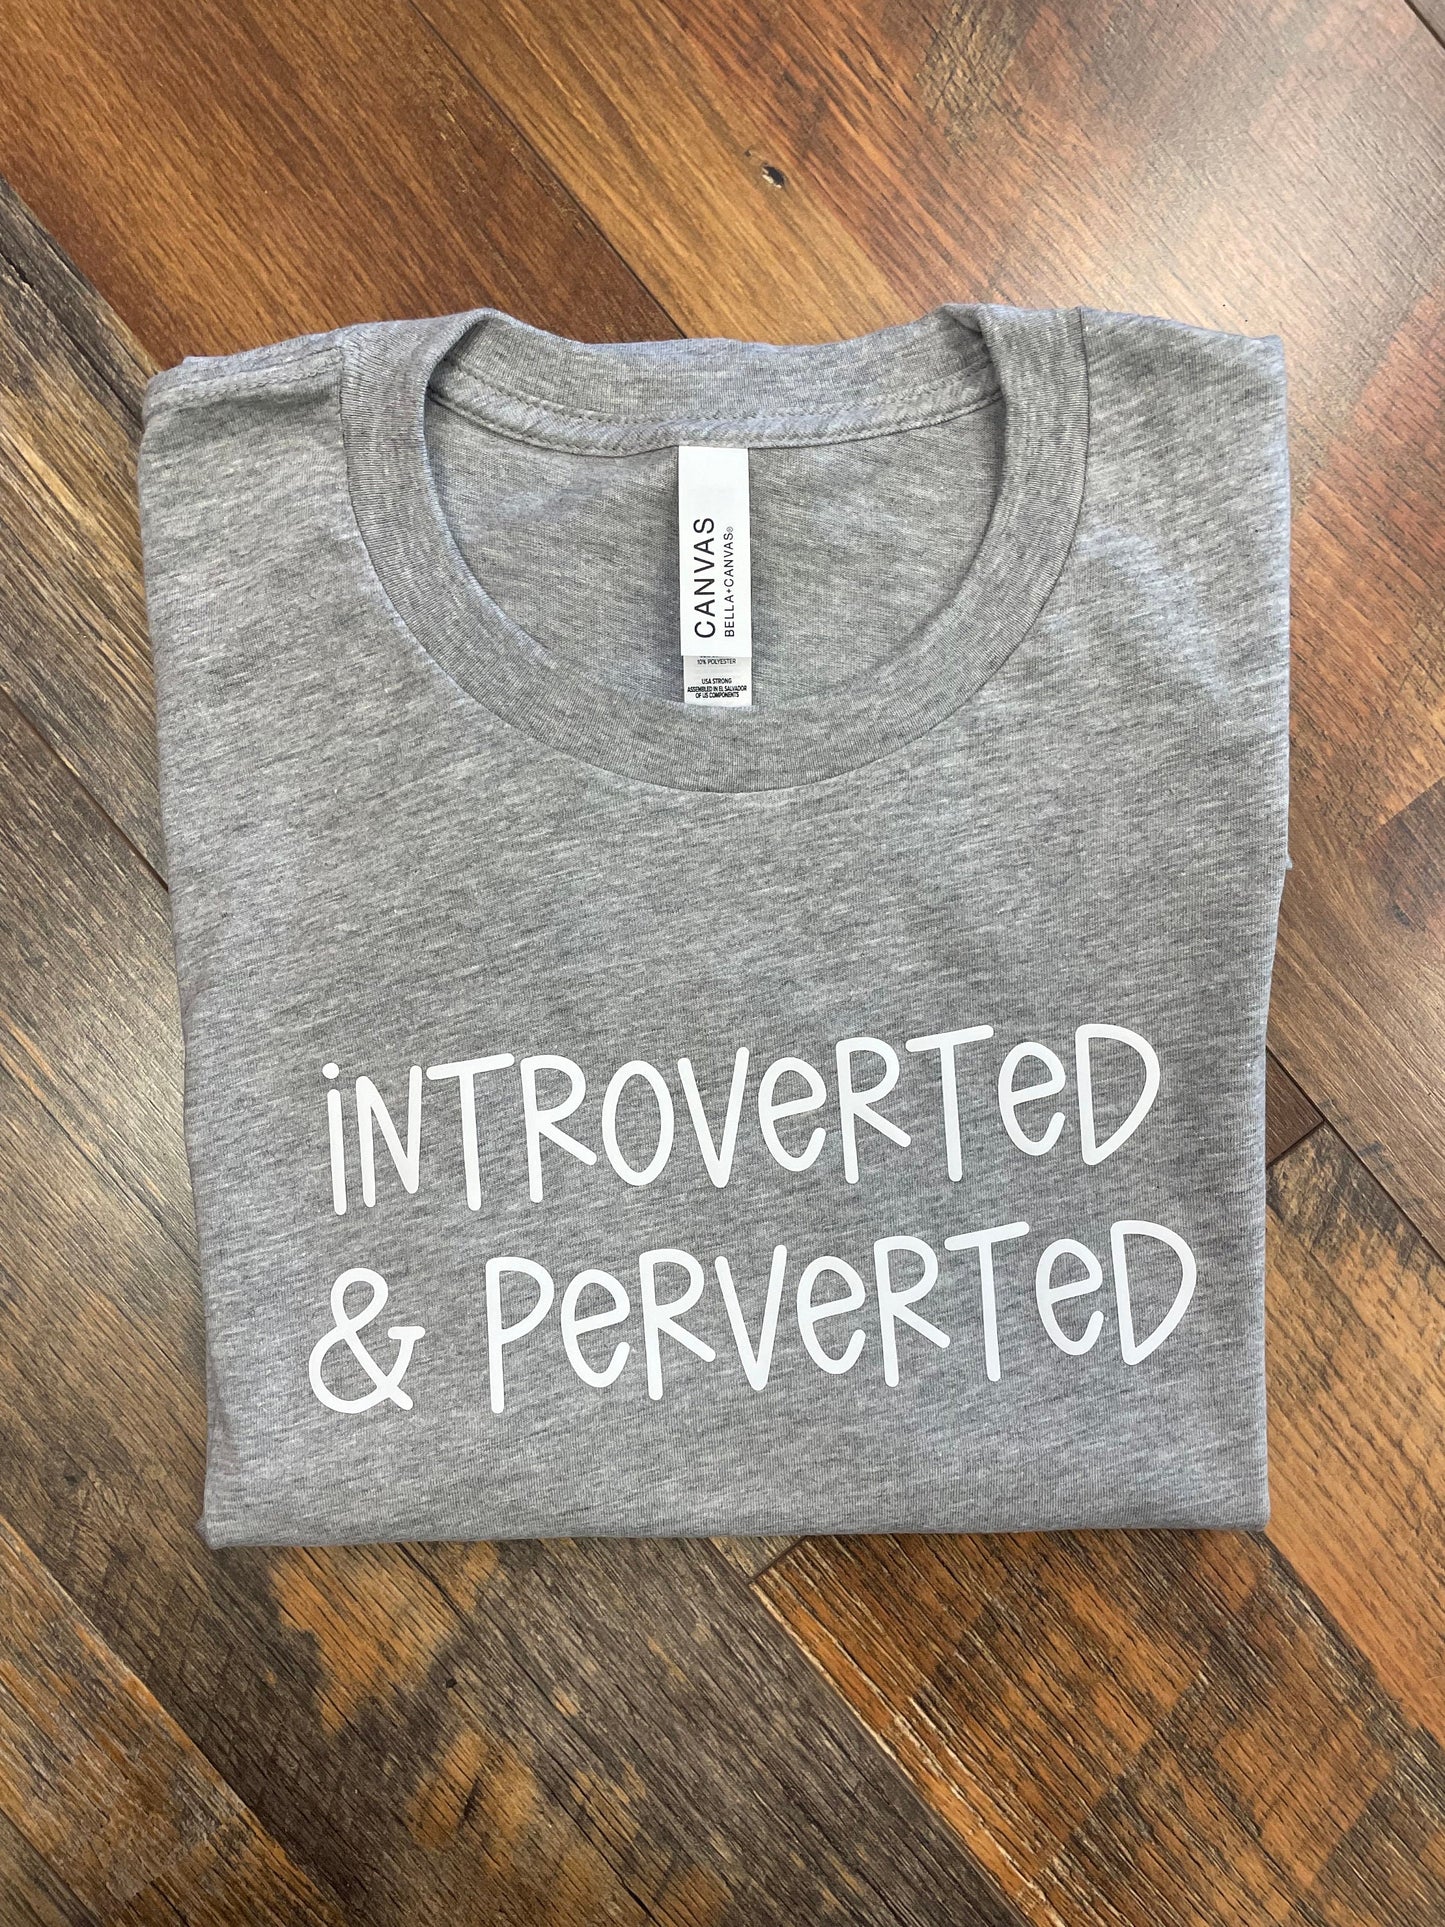 Introverted & Perverted, Gray T-shirt